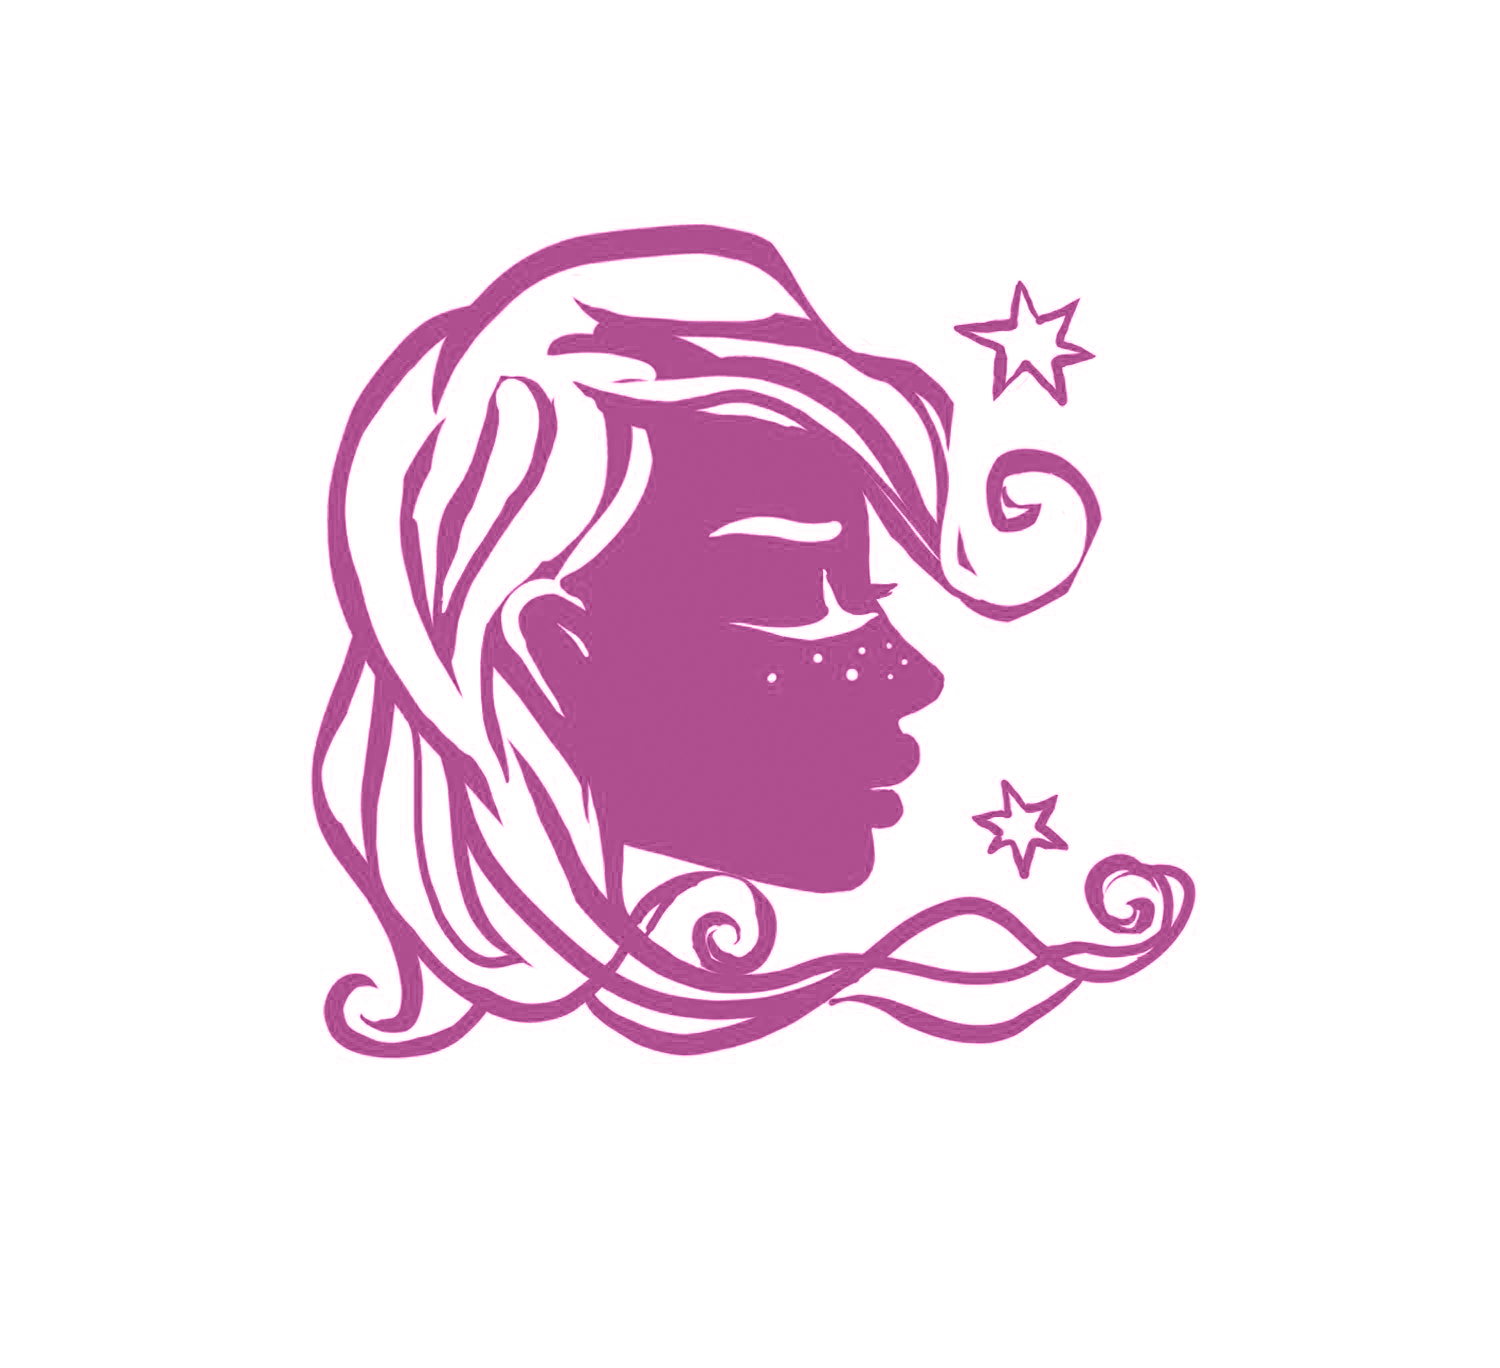 An outline of a woman in purple with stars